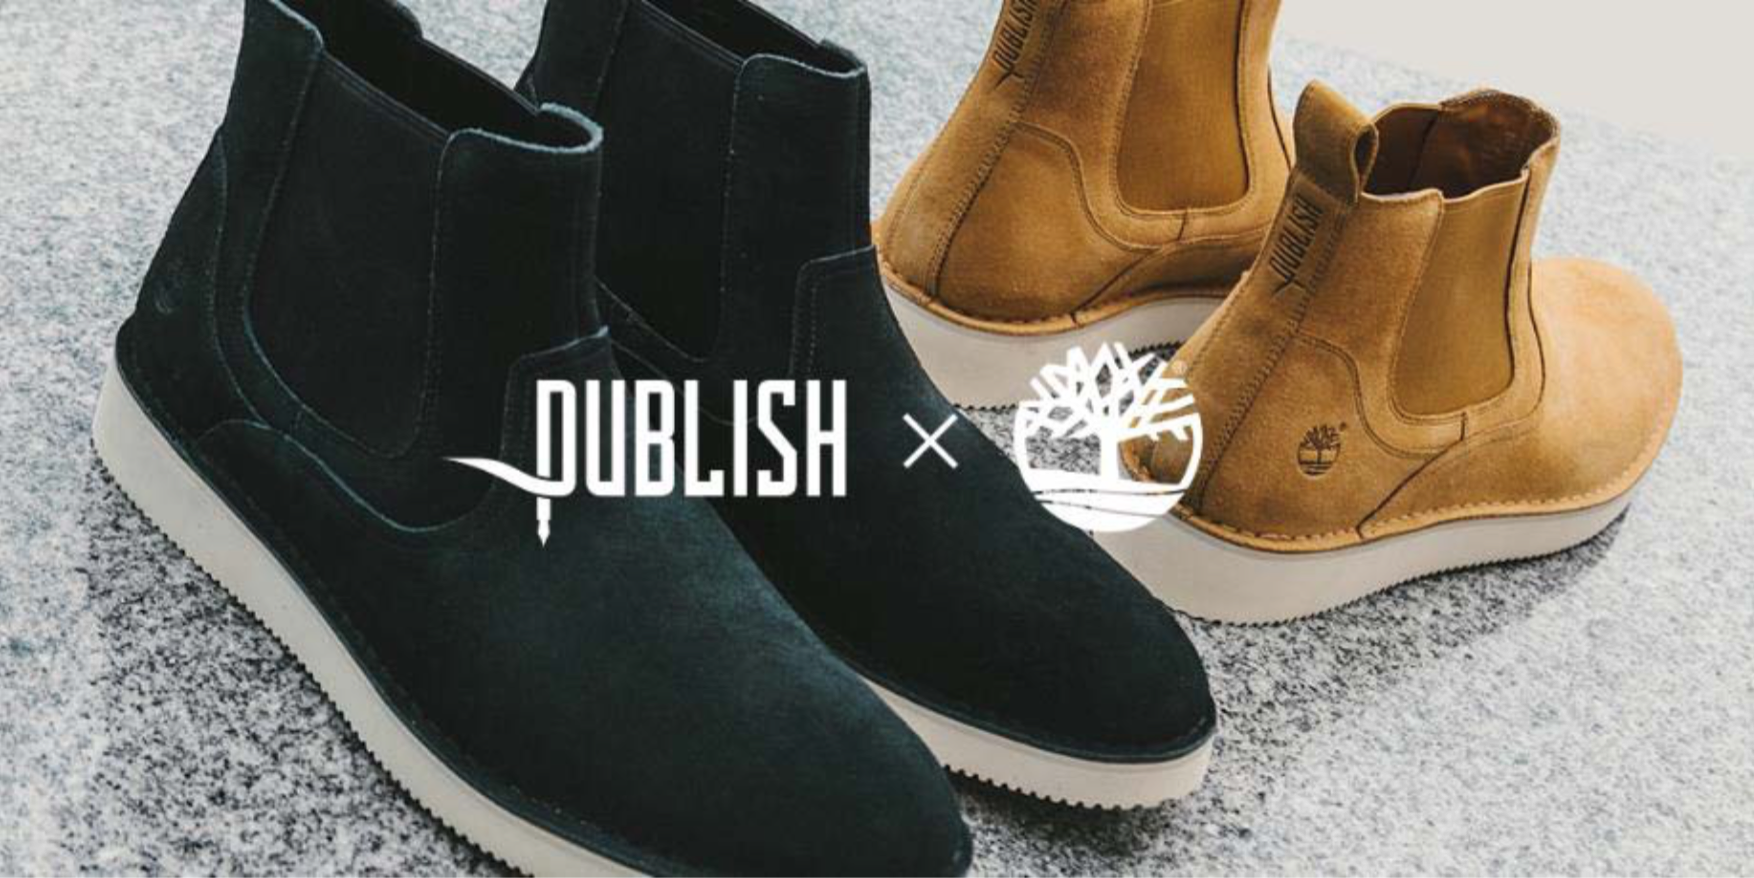 TIMBERLAND x PUBLISH Collection